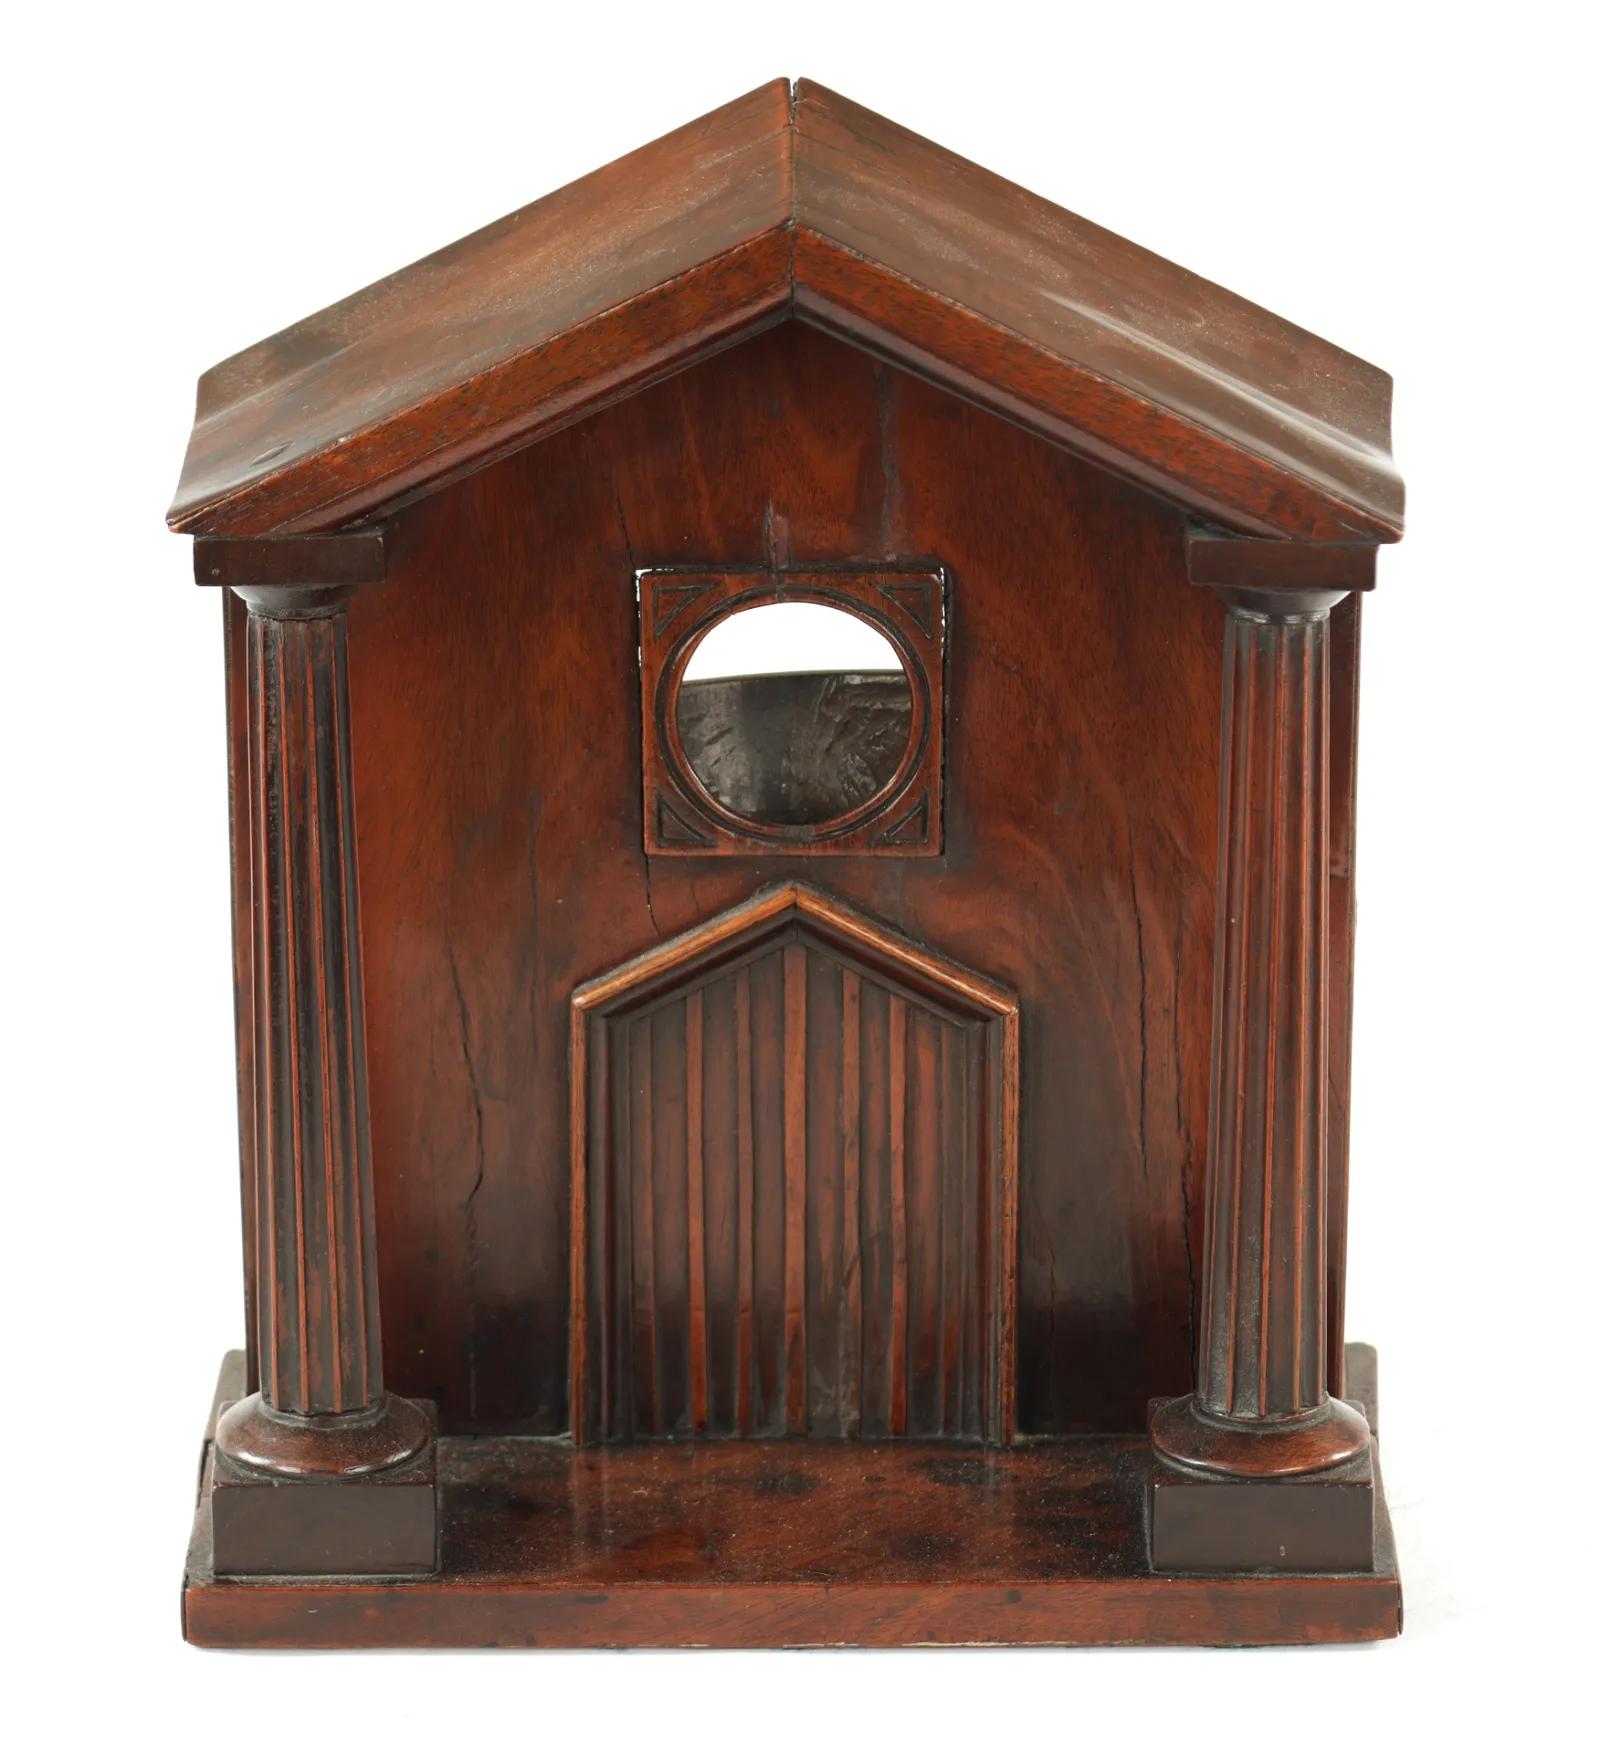 George III mahogany watch hutch of architectural form having fluted columns on a stepped base and supporting a gabled roof. The setback facade with a double door below a circular 